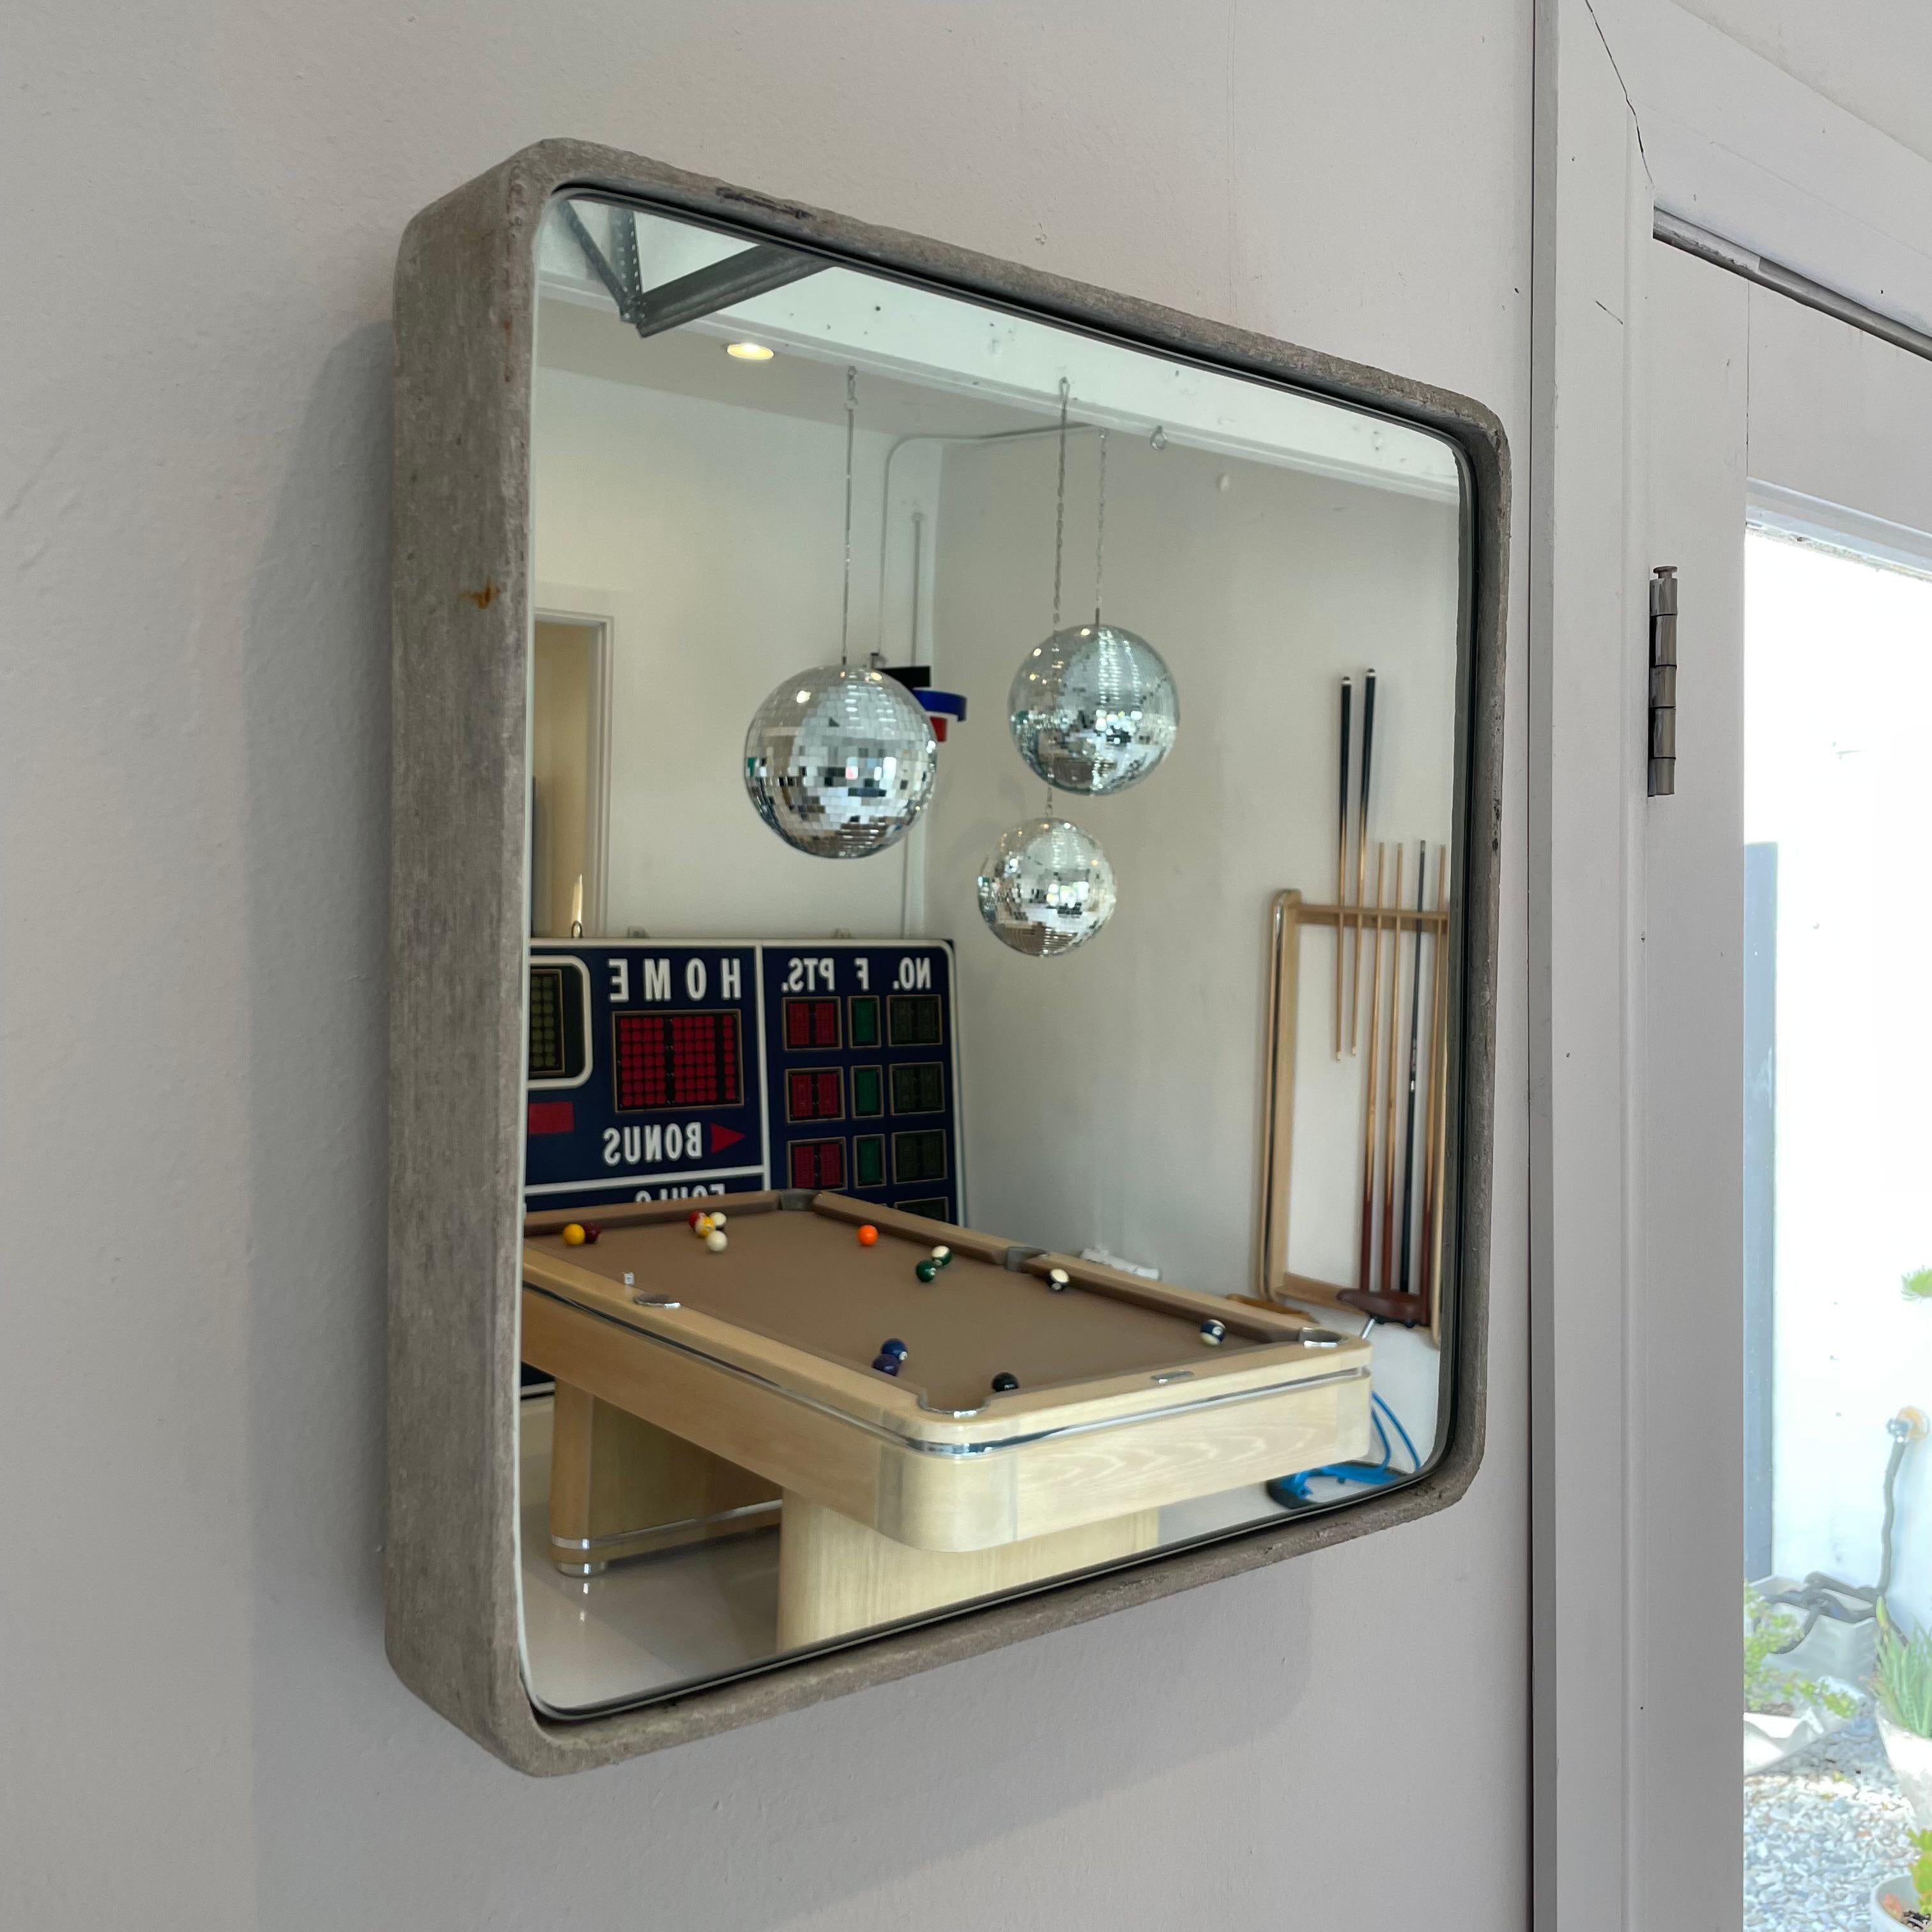 Beautiful square Willy Guhl concrete mirror. Concrete vessel originally produced at the Eternit factory in Switzerland in the 1960’s and mirror was professionally hand cut and added recently. Beautiful patina as expected with age featuring myriad of